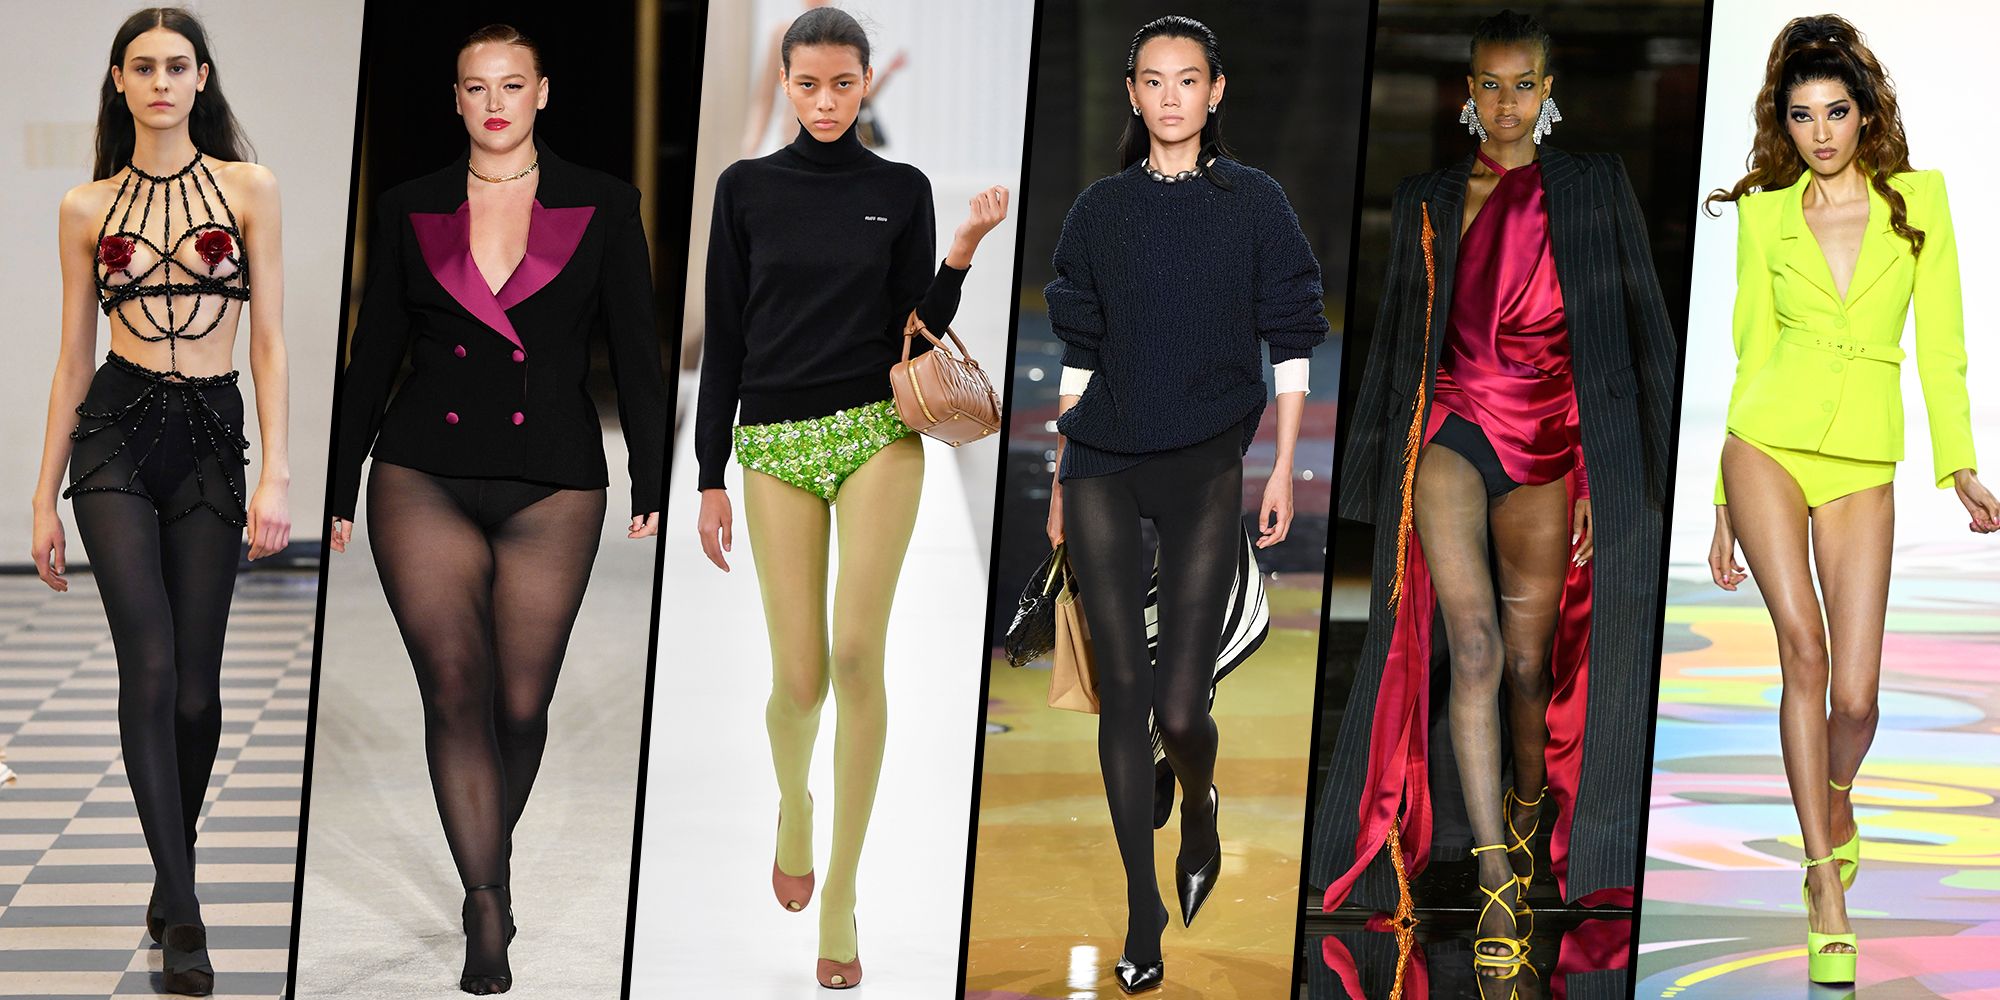 Pantyhose pants! Fashion or Offensive?? The world needs to know